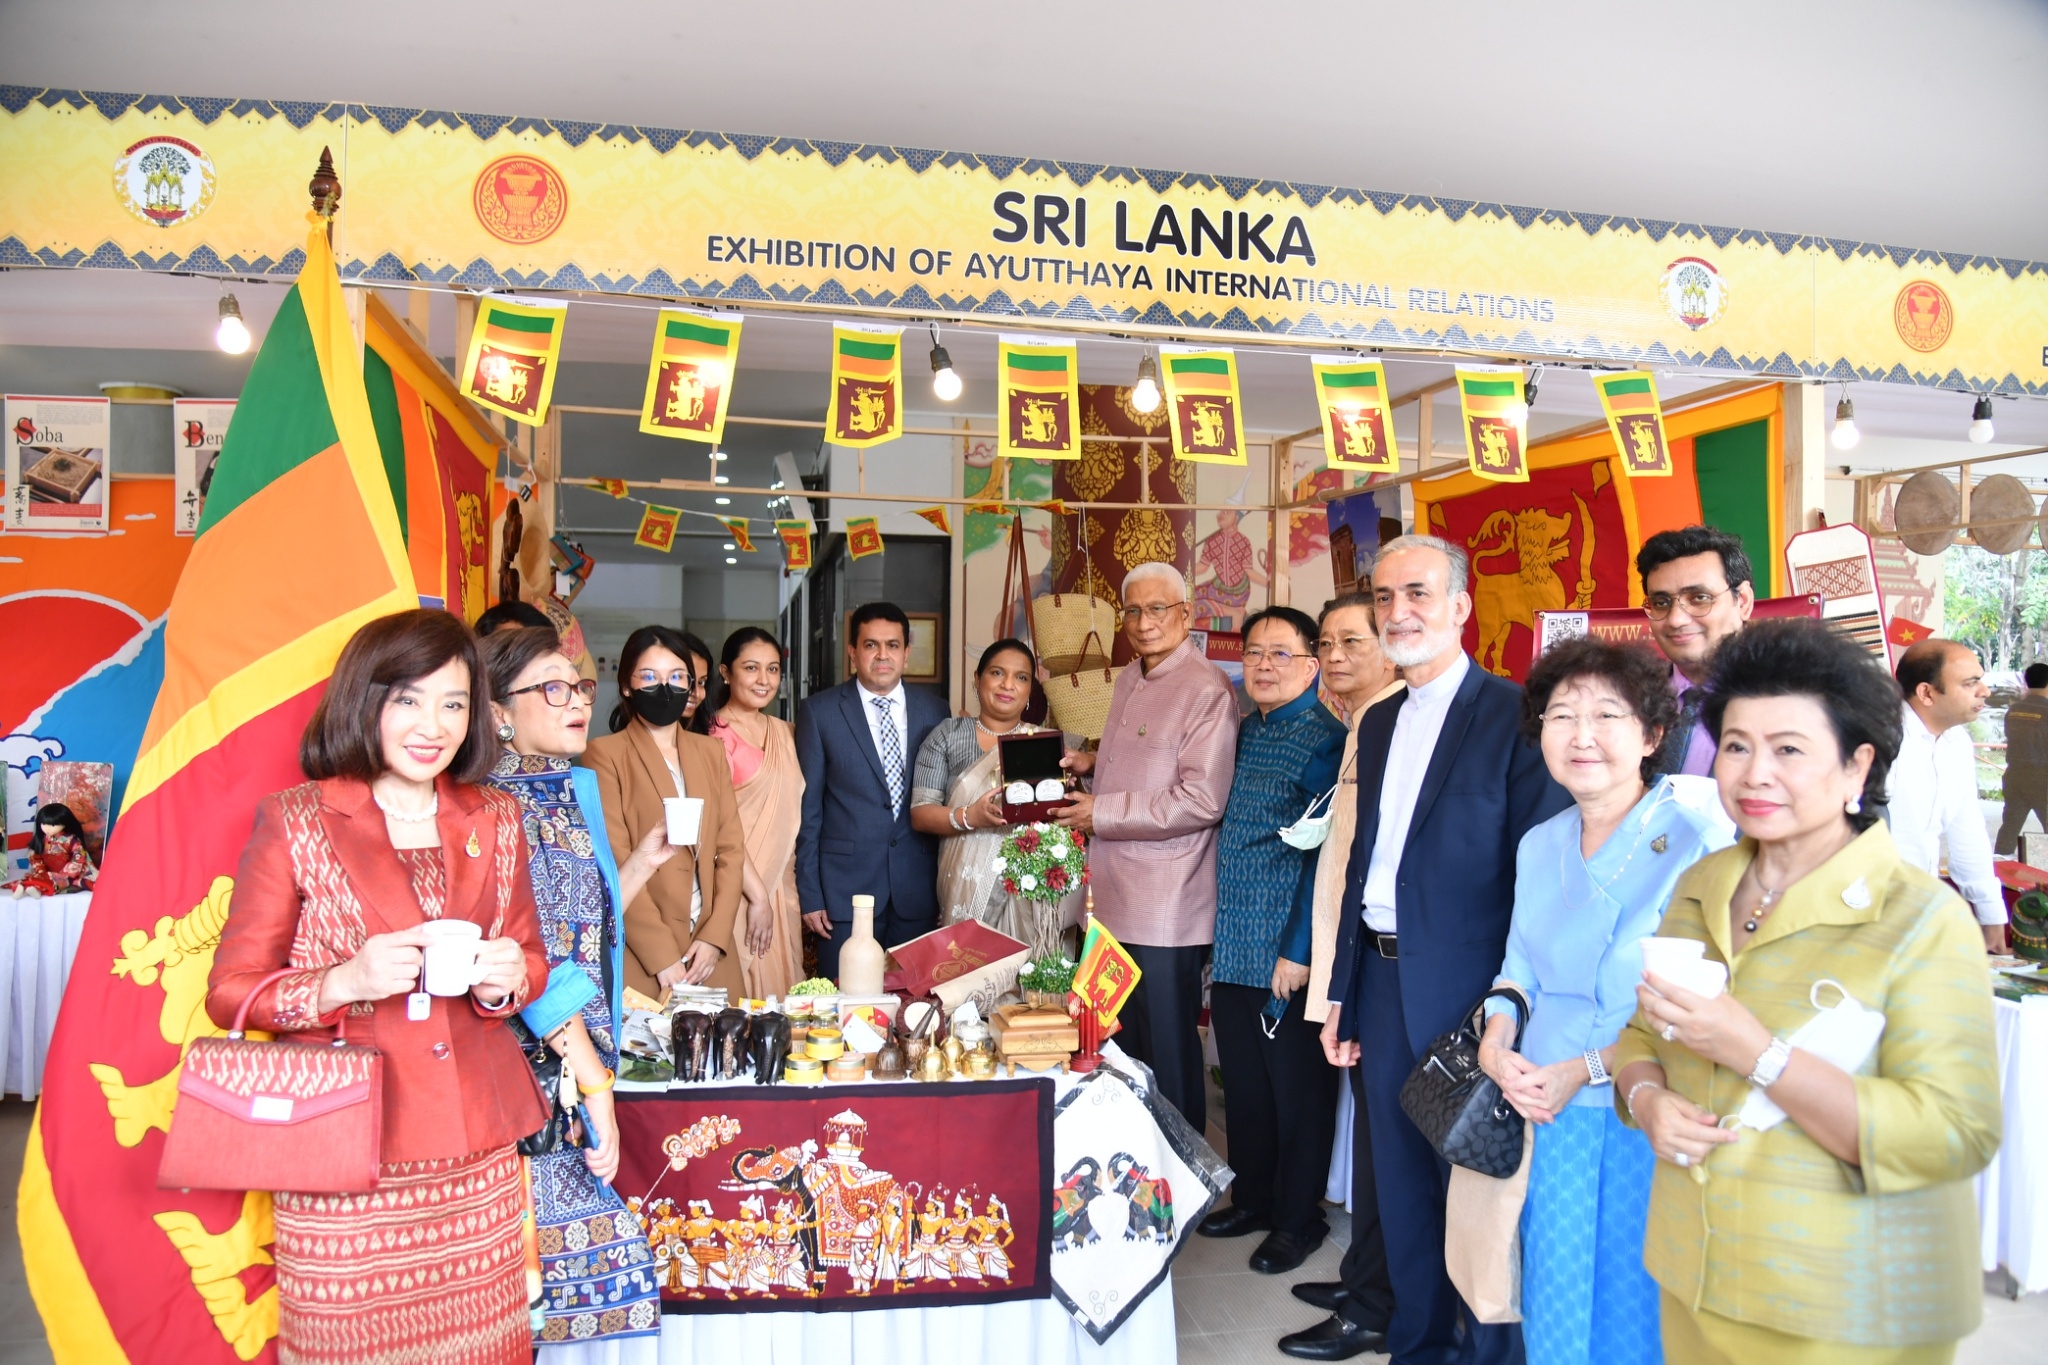 Sri Lanka joins “Reinvigoration of Ayutthaya's Foreign Relations” conducted by the National Assembly of the Kingdom of Thailand